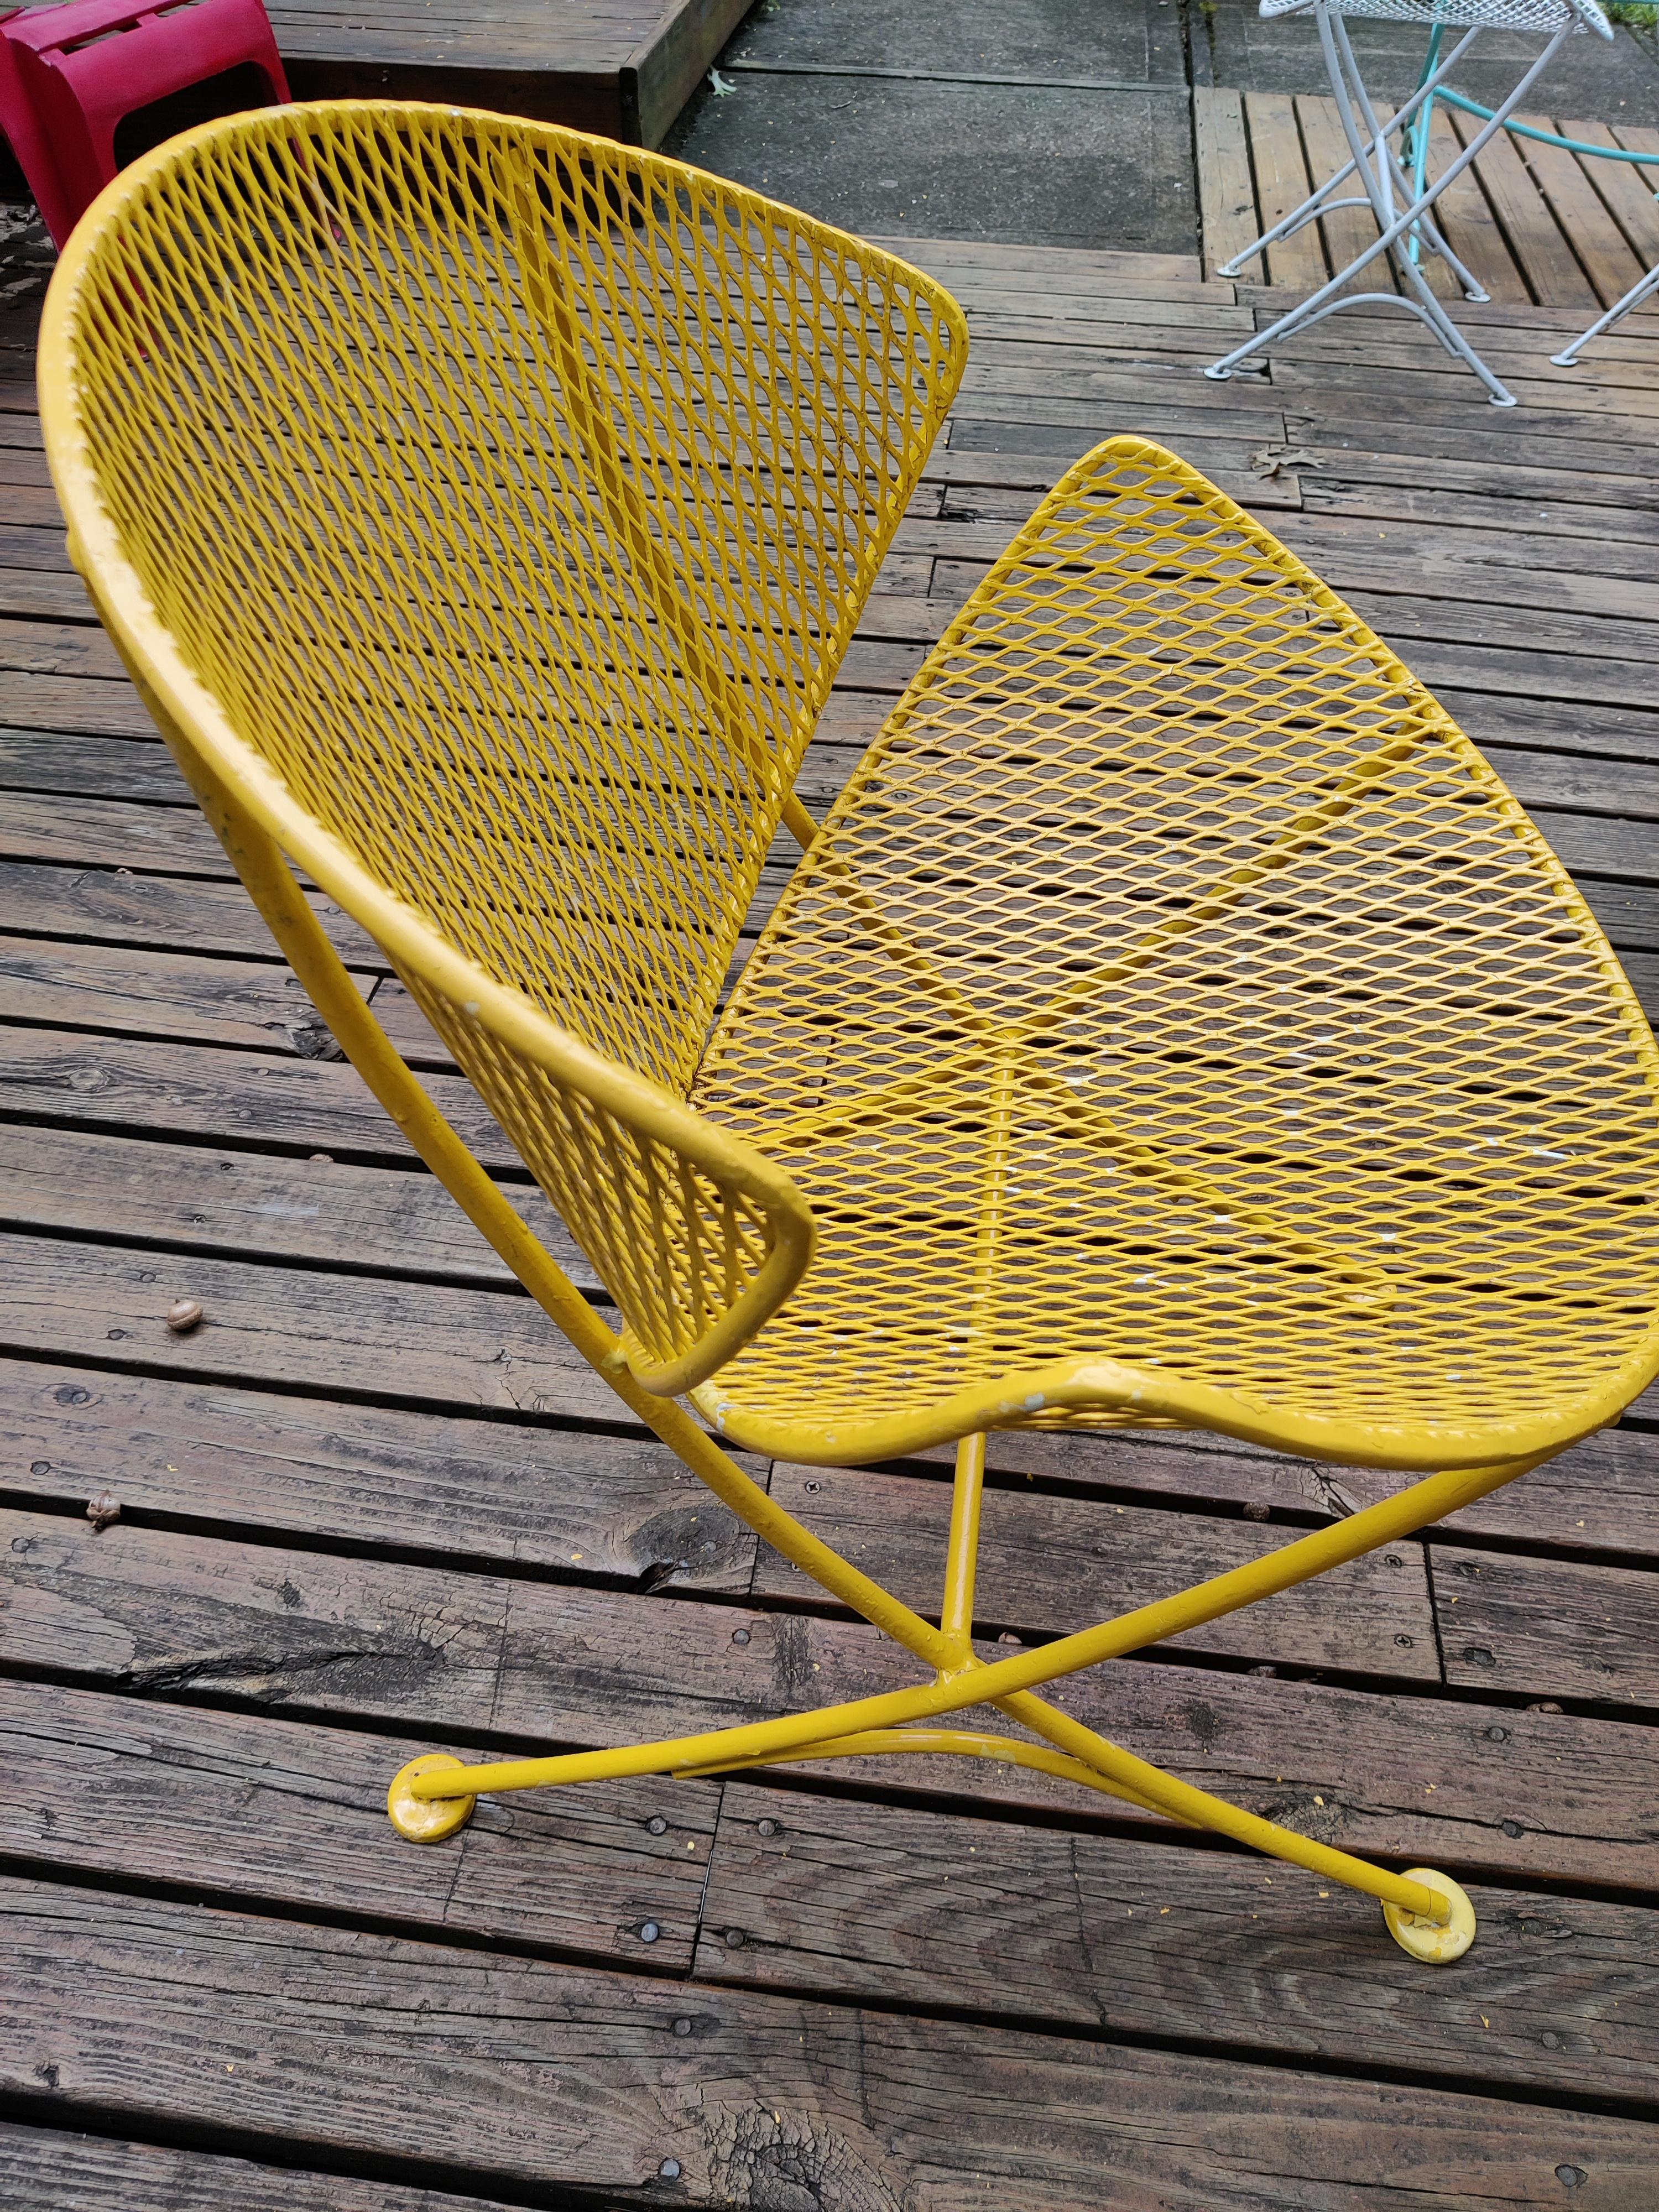 Maurizio Tempestini 1950's wrought iron patio set
Table and 4 clam shell chairs
Paint is peeling in some areas but is in great condition for age.  No rust. 
Chairs are 26.75 H in back, 22.25 across.   Seat slopes slightly lower in back
